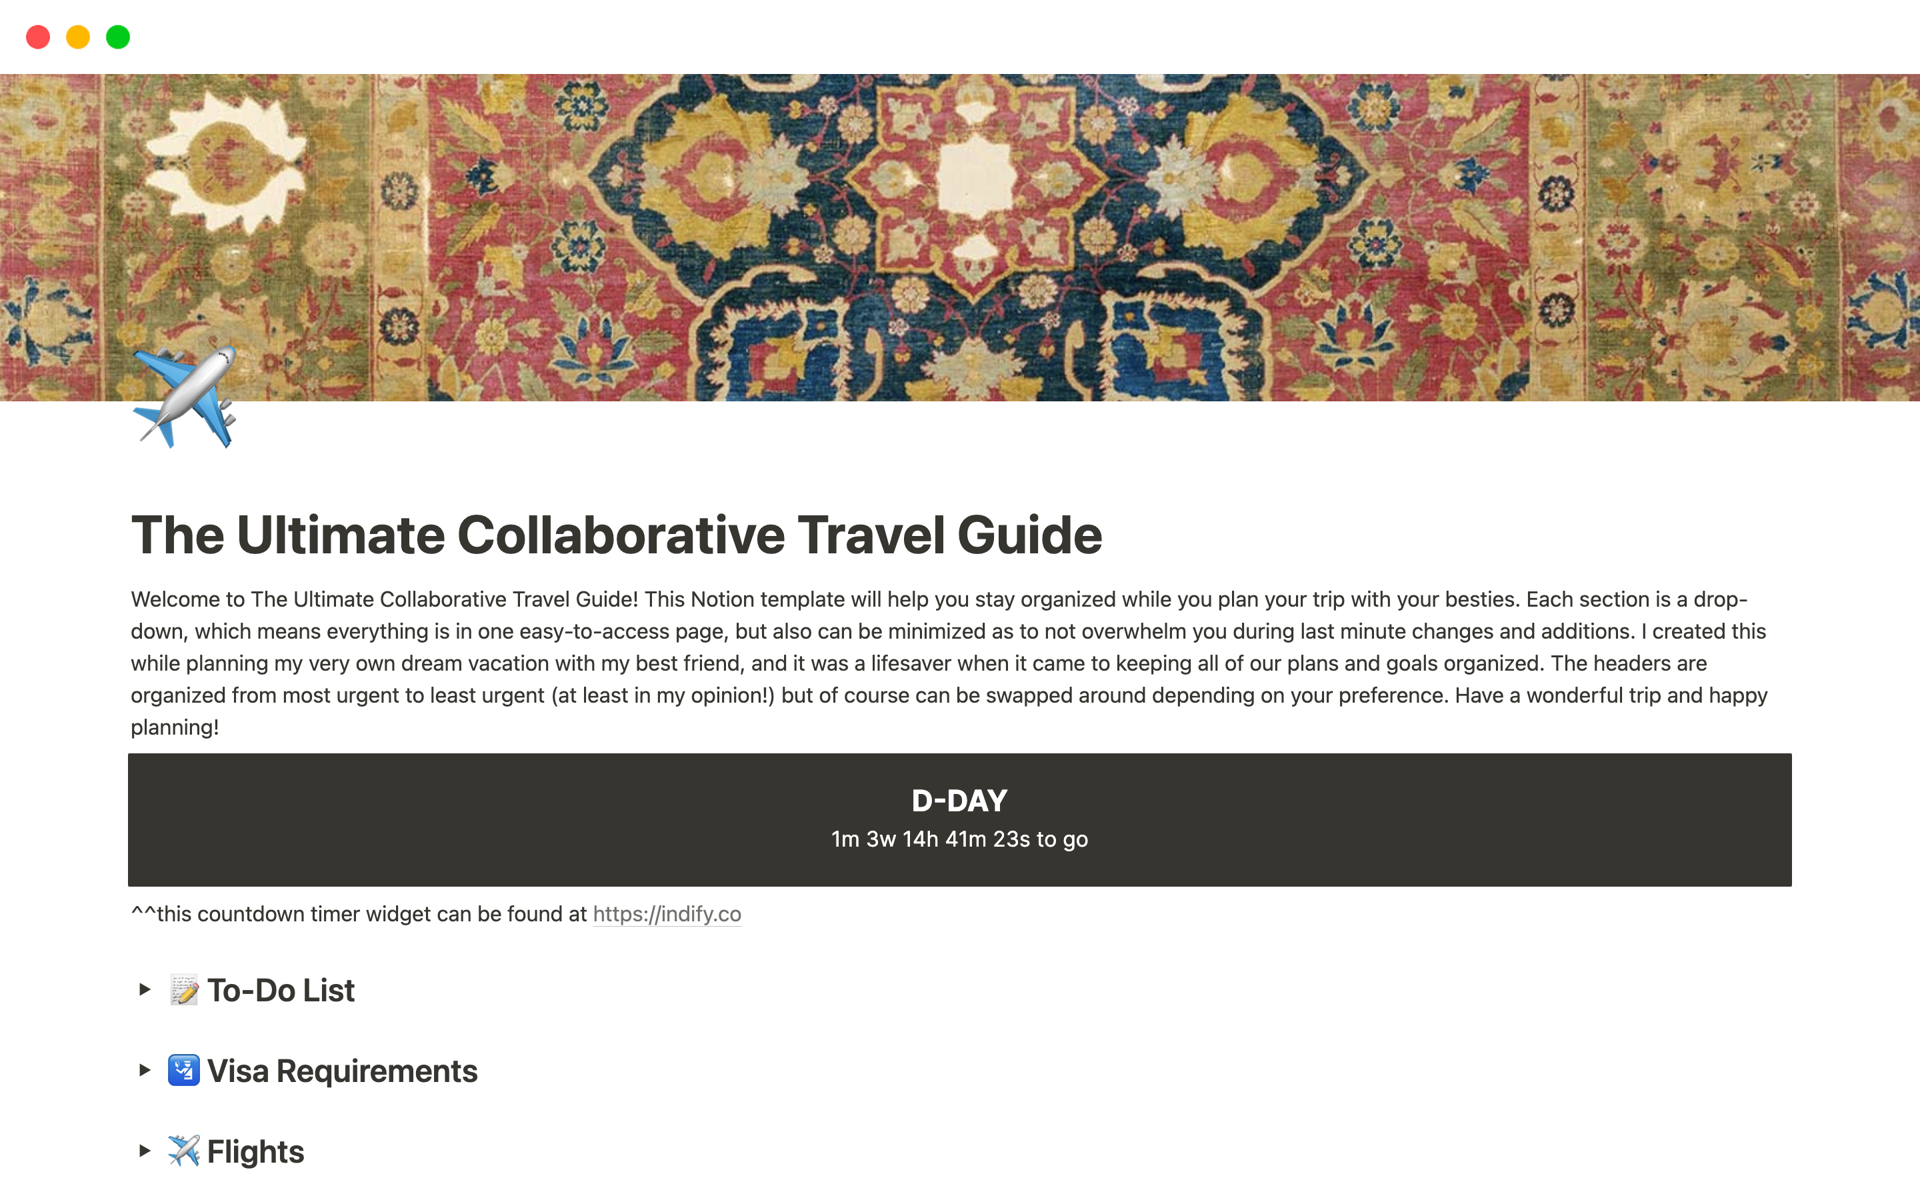 The Ultimate Collaborate Travel guide helps you and your travel partners organize and plan your dream trip.